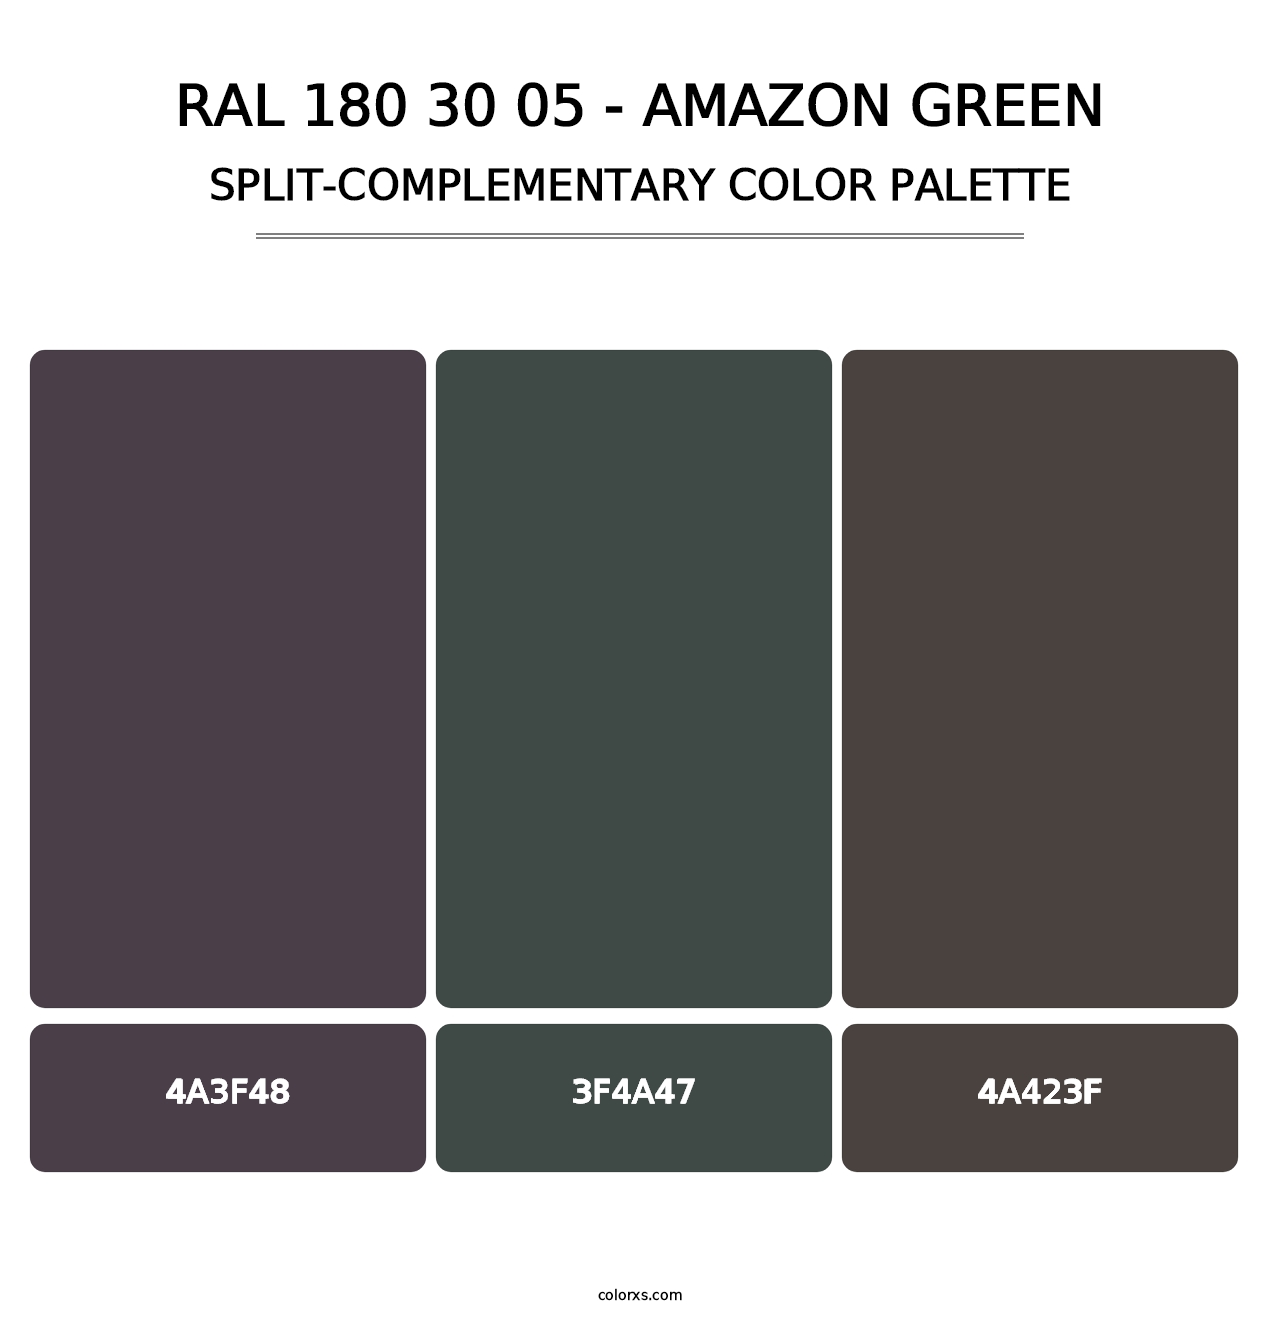 RAL 180 30 05 - Amazon Green - Split-Complementary Color Palette